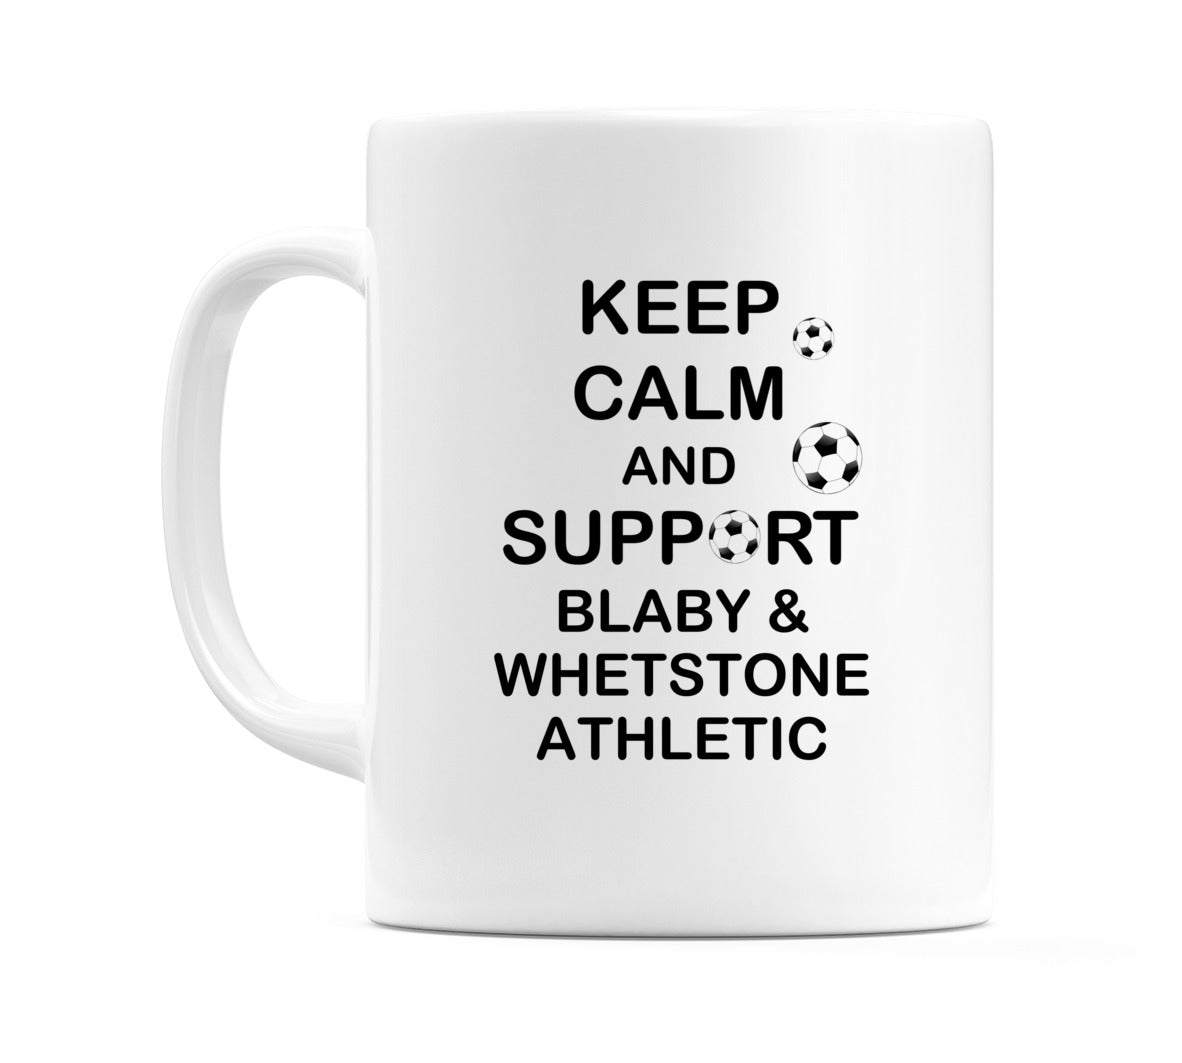 Keep Calm And Support Blaby & Whetstone Athletic Mug